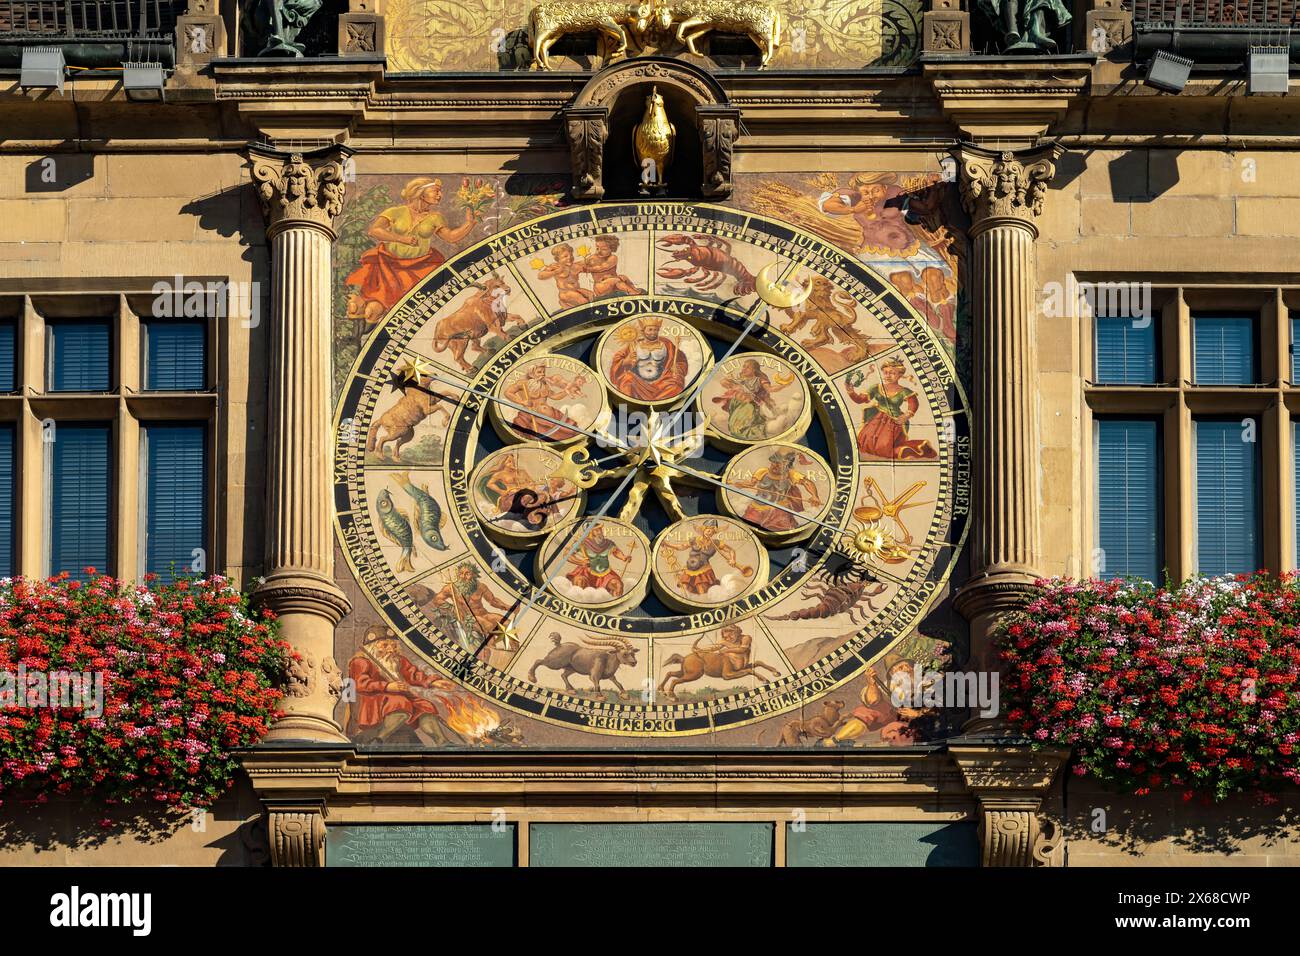 Historic astronomical clock at the town hall in Heilbronn, Baden-Württemberg, Germany Stock Photo